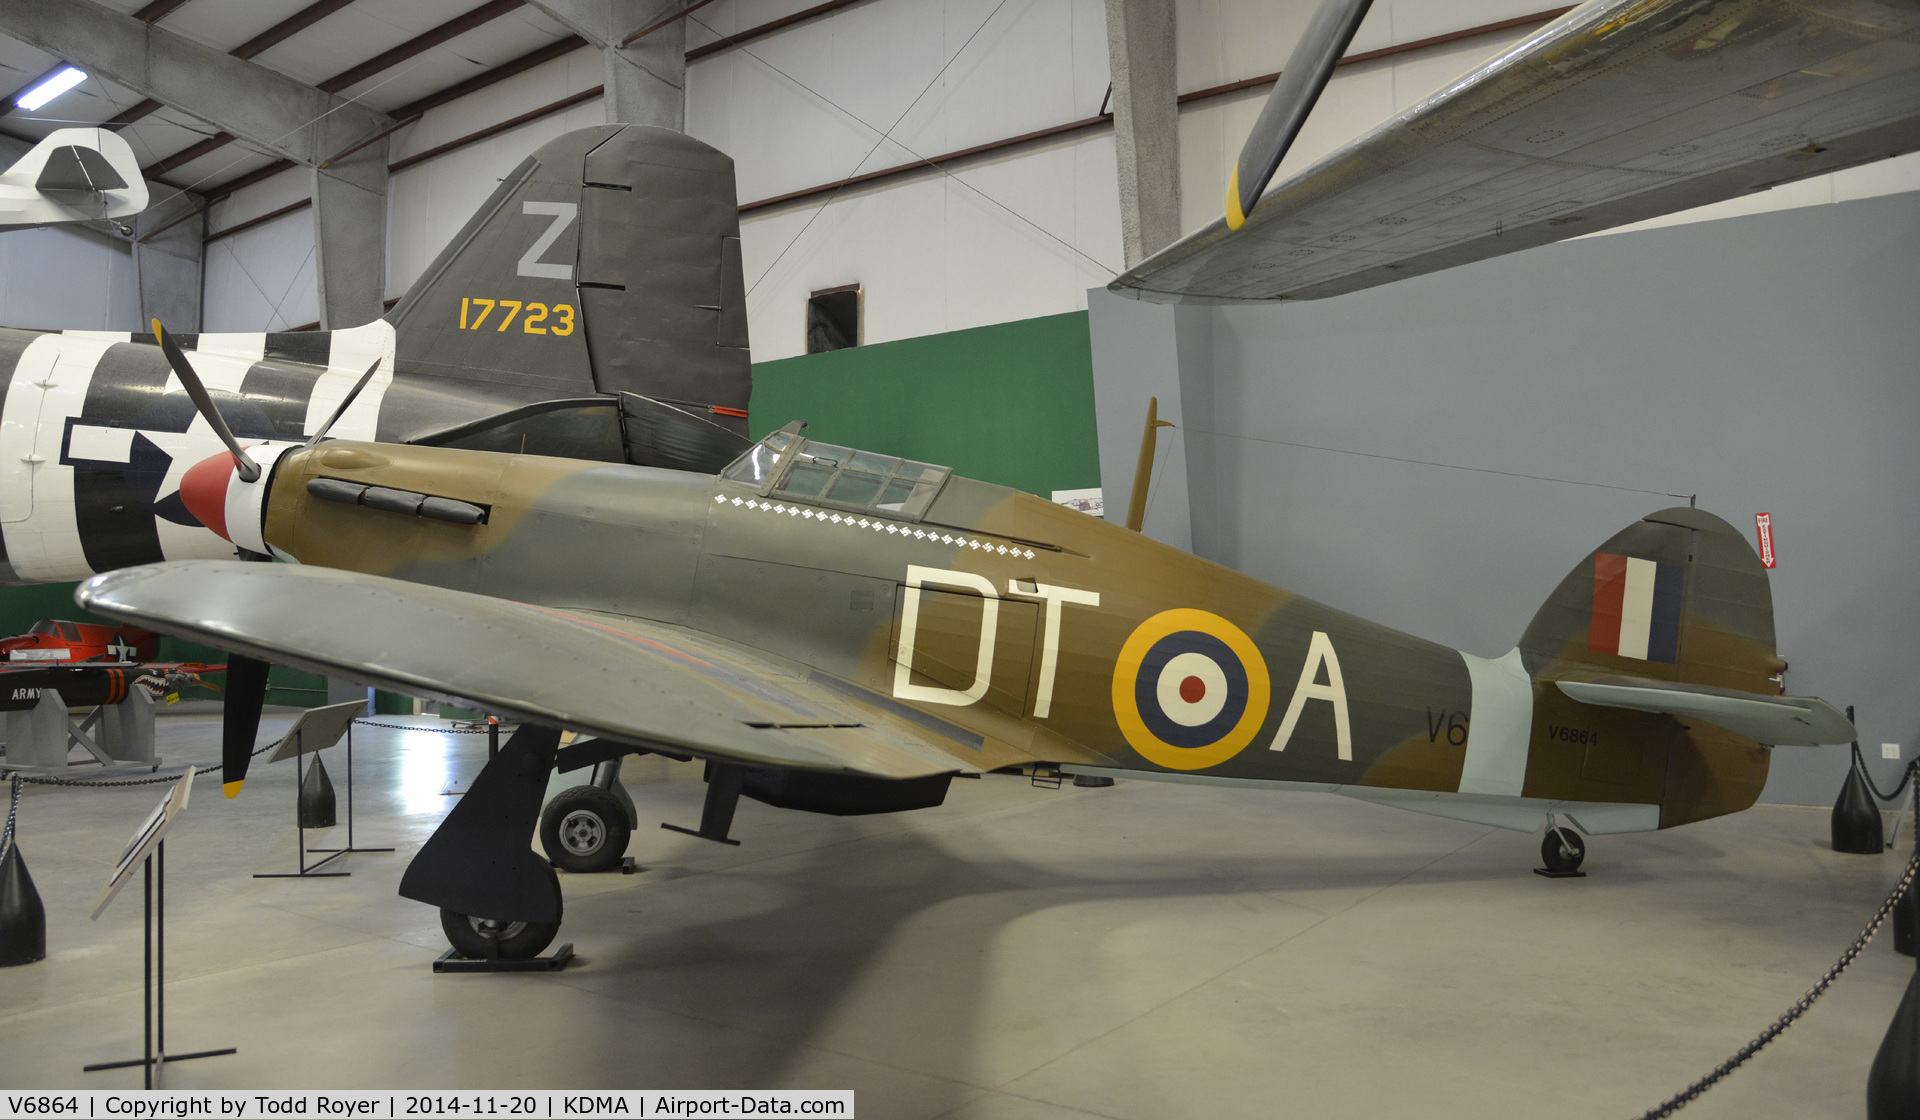 V6864, Hawker (CCF) Hurricane Mk12 C/N Not found V6864, On display at the Pima Air and Space Museum